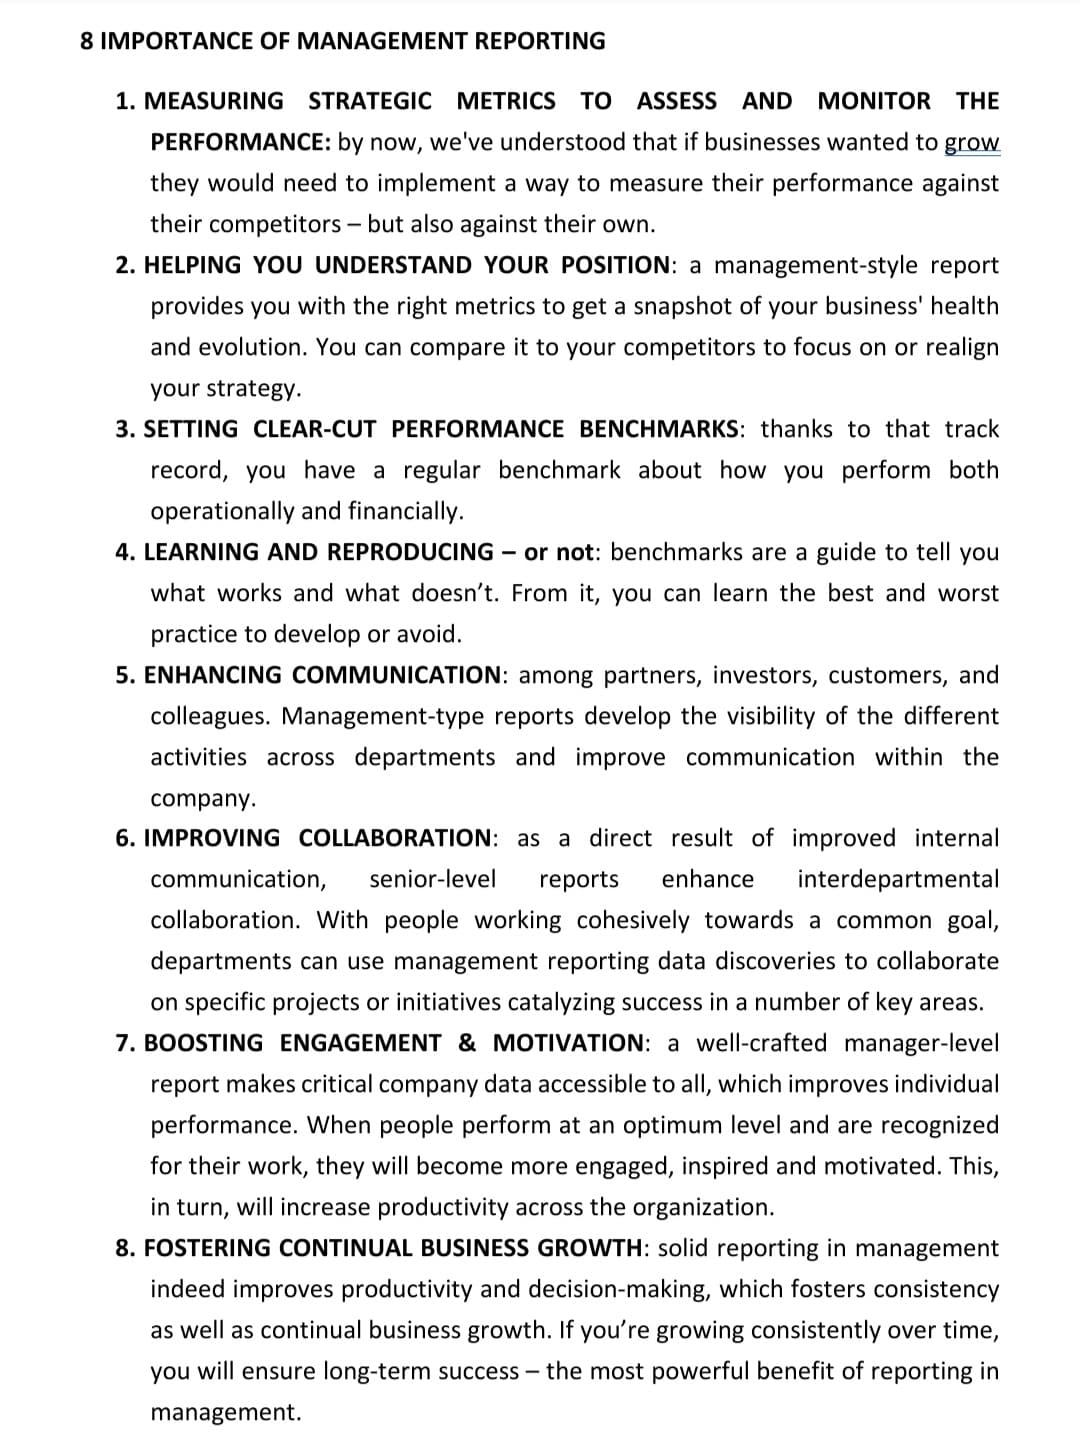 8 IMPORTANCE OF MANAGEMENT REPORTING
1. MEASURING STRATEGIC METRICS TO ASSESS
AND MONITOR THE
PERFORMANCE: by now, we've understood that if businesses wanted to grow
they would need to implement a way to measure their performance against
their competitors – but also against their own.
2. HELPING YOU UNDERSTAND YOUR POSITION: a management-style report
provides you with the right metrics to get a snapshot of your business' health
and evolution. You can compare it to your competitors to focus on or realign
your strategy.
3. SETTING CLEAR-CUT PERFORMANCE BENCHMARKS: thanks to that track
record, you have a regular benchmark about how you perform both
operationally and financially.
4. LEARNING AND REPRODUCING – or not: benchmarks are a guide to tell you
what works and what doesn't. From it, you can learn the best and worst
practice to develop or avoid.
5. ENHANCING COMMUNICATION: among partners, investors, customers, and
colleagues. Management-type reports develop the visibility of the different
activities across departments and improve communication within the
company.
6. IMPROVING COLLABORATION: as a direct result of improved internal
communication,
senior-level
reports
enhance
interdepartmental
collaboration. With people working cohesively towards a common goal,
departments can use management reporting data discoveries to collaborate
on specific projects or initiatives catalyzing success in a number of key areas.
7. BOOSTING ENGAGEMENT & MOTIVATION: a well-crafted manager-level
report makes critical company data accessible to all, which improves individual
performance. When people perform at an optimum level and are recognized
for their work, they will become more engaged, inspired and motivated. This,
in turn, will increase productivity across the organization.
8. FOSTERING CONTINUAL BUSINESS GROWTH: solid reporting in management
indeed improves productivity and decision-making, which fosters consistency
as well as continual business growth. If you're growing consistently over time,
you will ensure long-term success – the most powerful benefit of reporting in
management.
